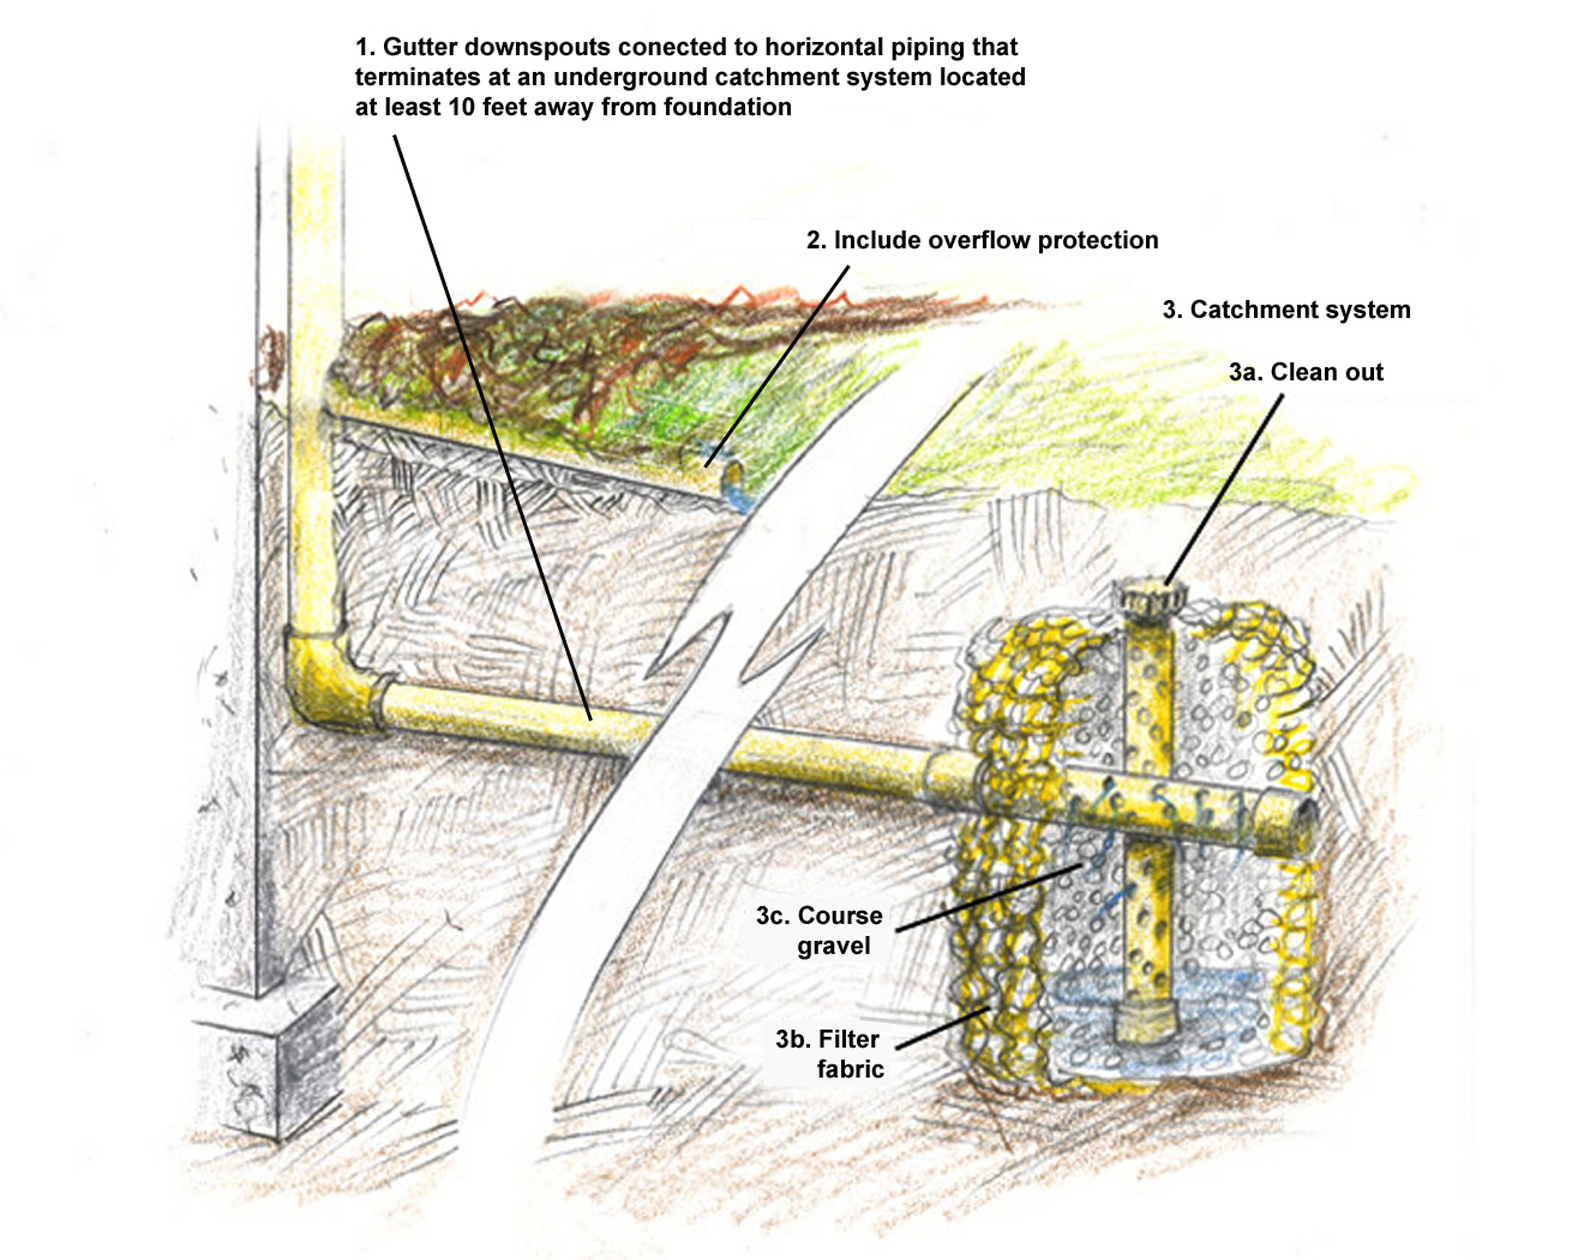 Catchment system. A roof runoff catchment system, such as the drywell shown here, must be located at least 10 feet from the building foundation.  